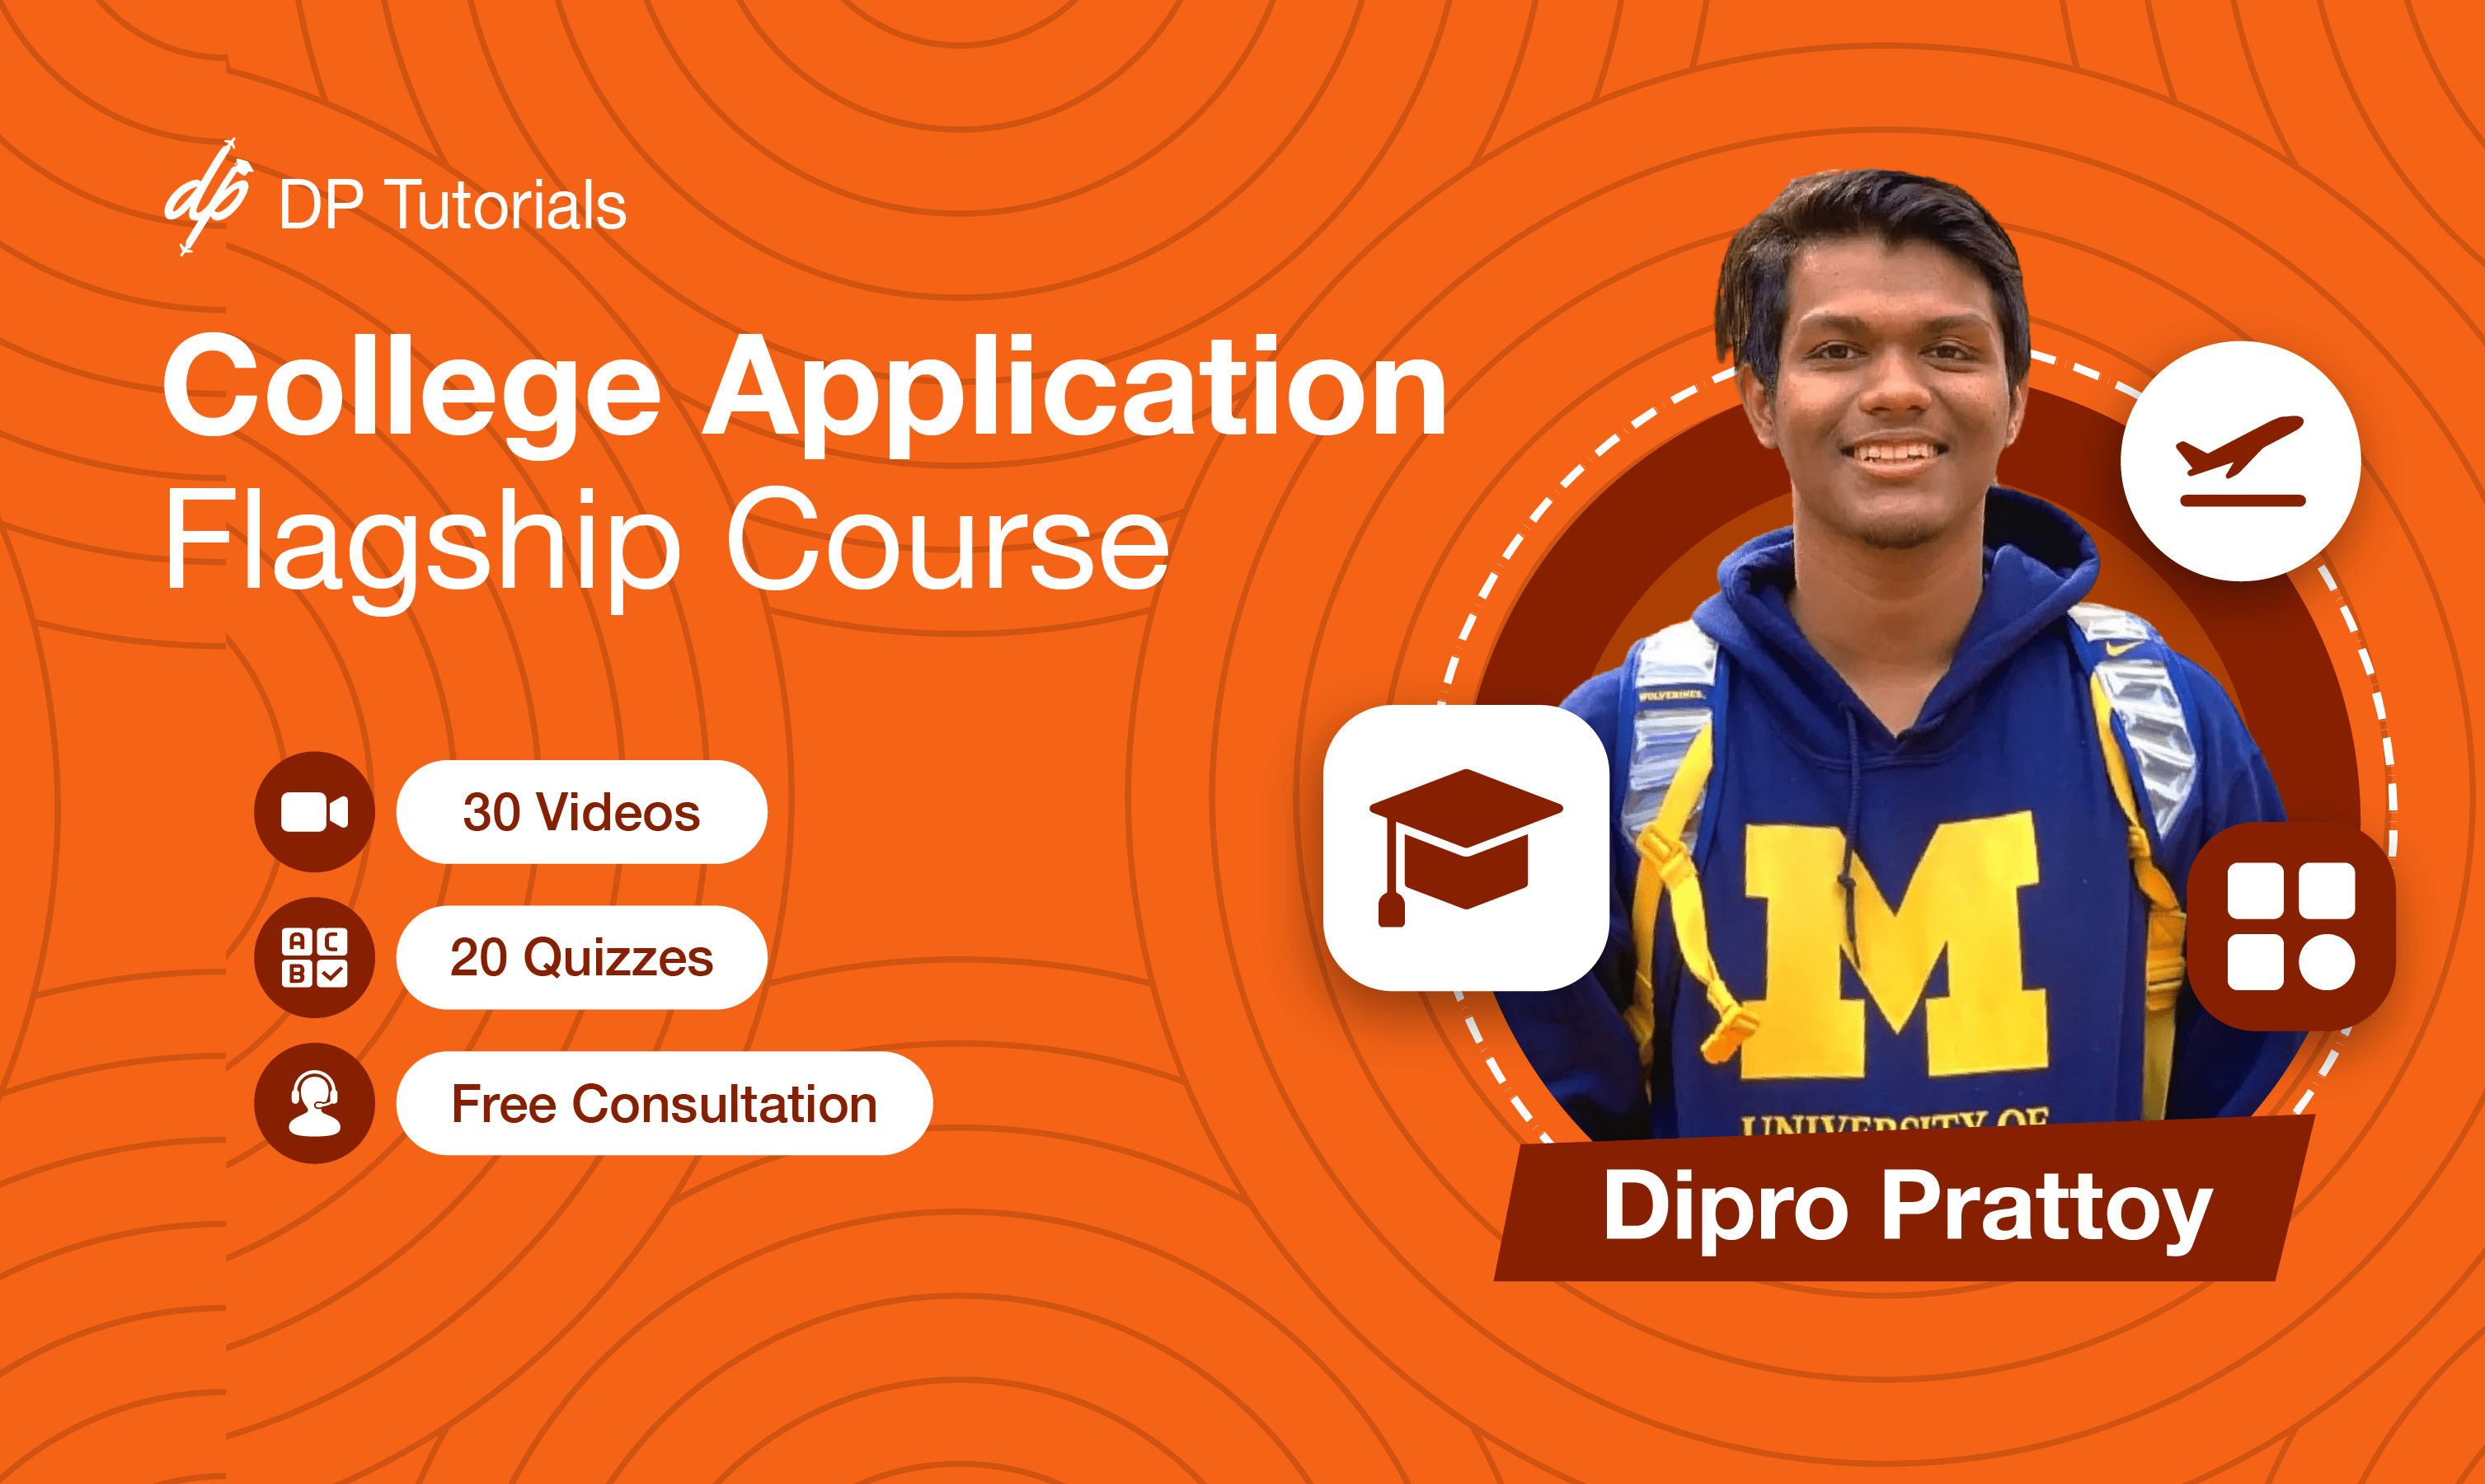 College Application Flagship Course